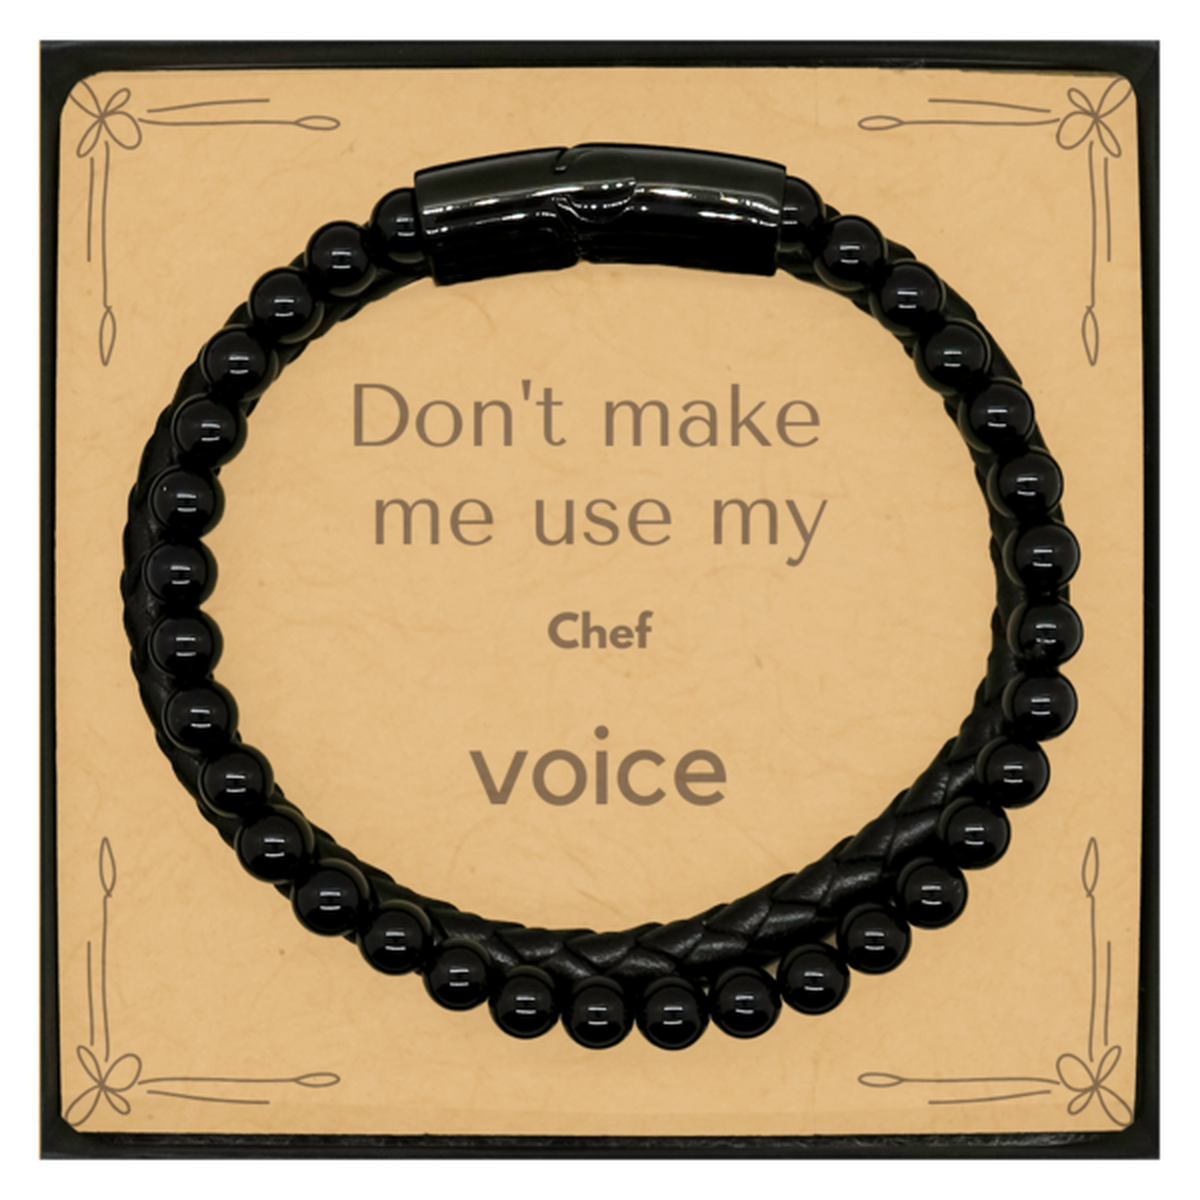 Don't make me use my Chef voice, Sarcasm Chef Card Gifts, Christmas Chef Stone Leather Bracelets Birthday Unique Gifts For Chef Coworkers, Men, Women, Colleague, Friends